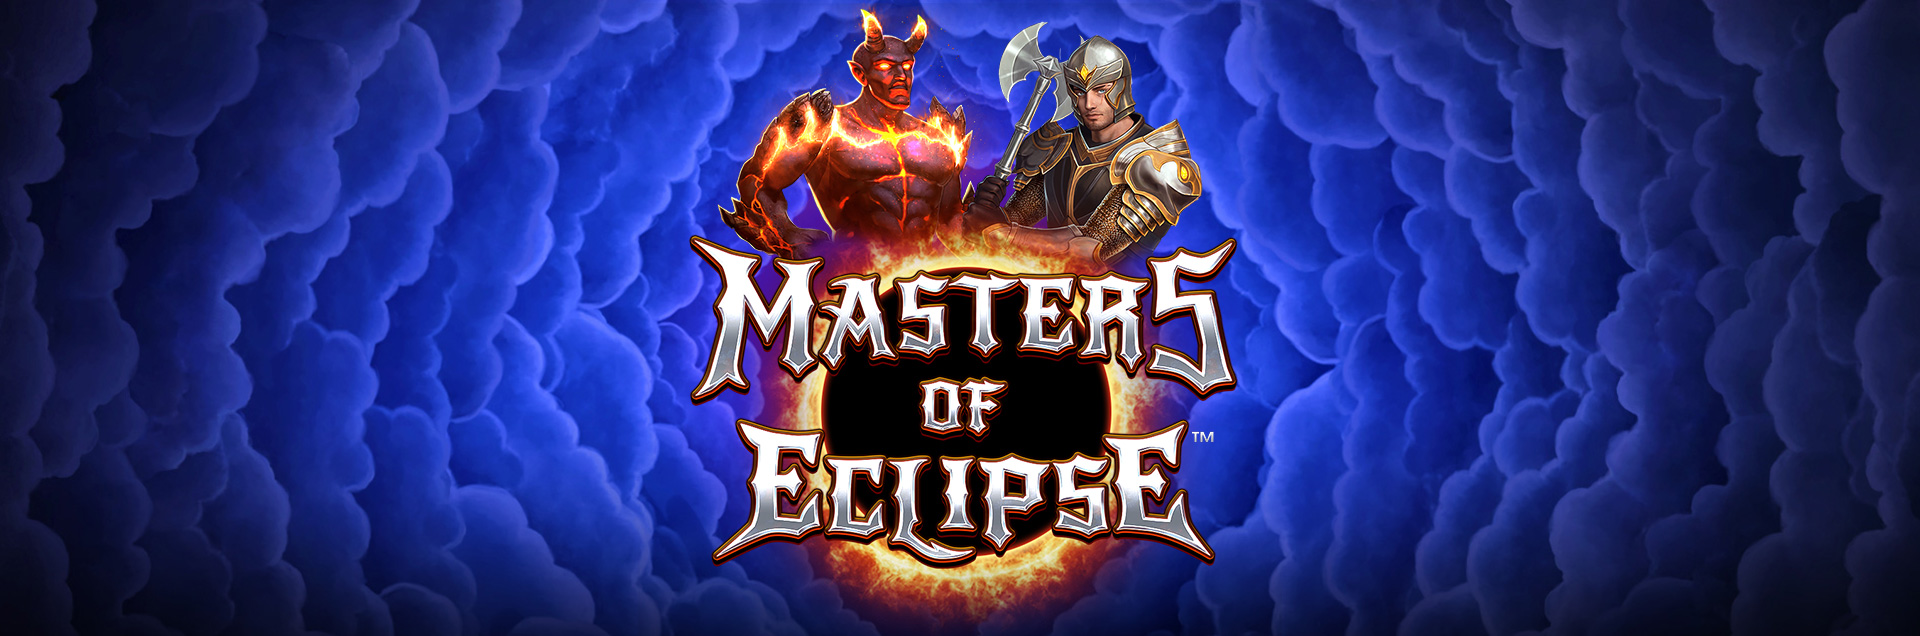 Masters of Eclipse header games